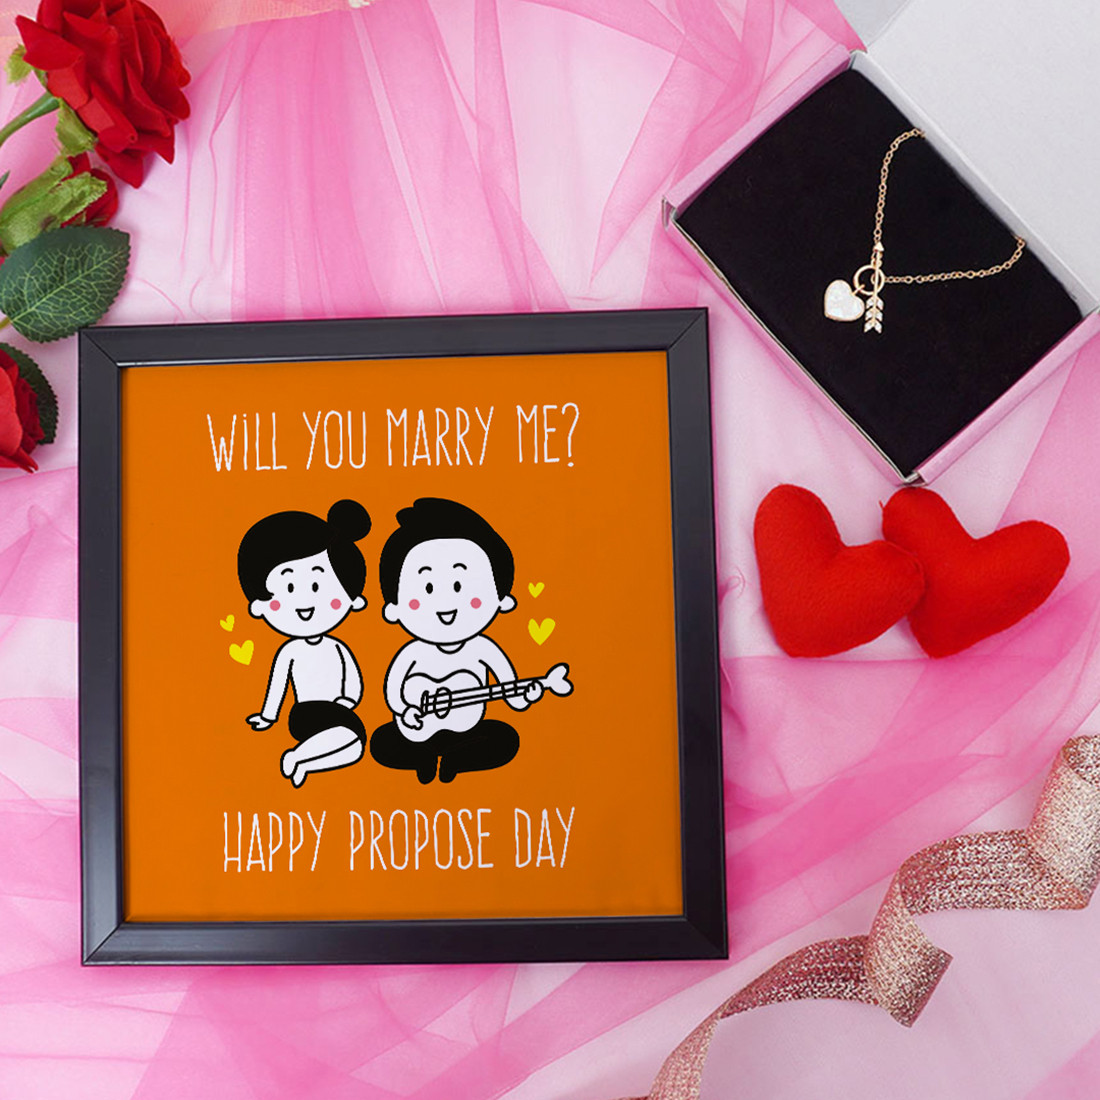 Will You Marry Me ? Valentine Gift Set | Valentine's Day Gifts for Girlfriend | Valentine Gift for Wife | Pendant for Girl/Women | Photo Frame (8x8 Inches)